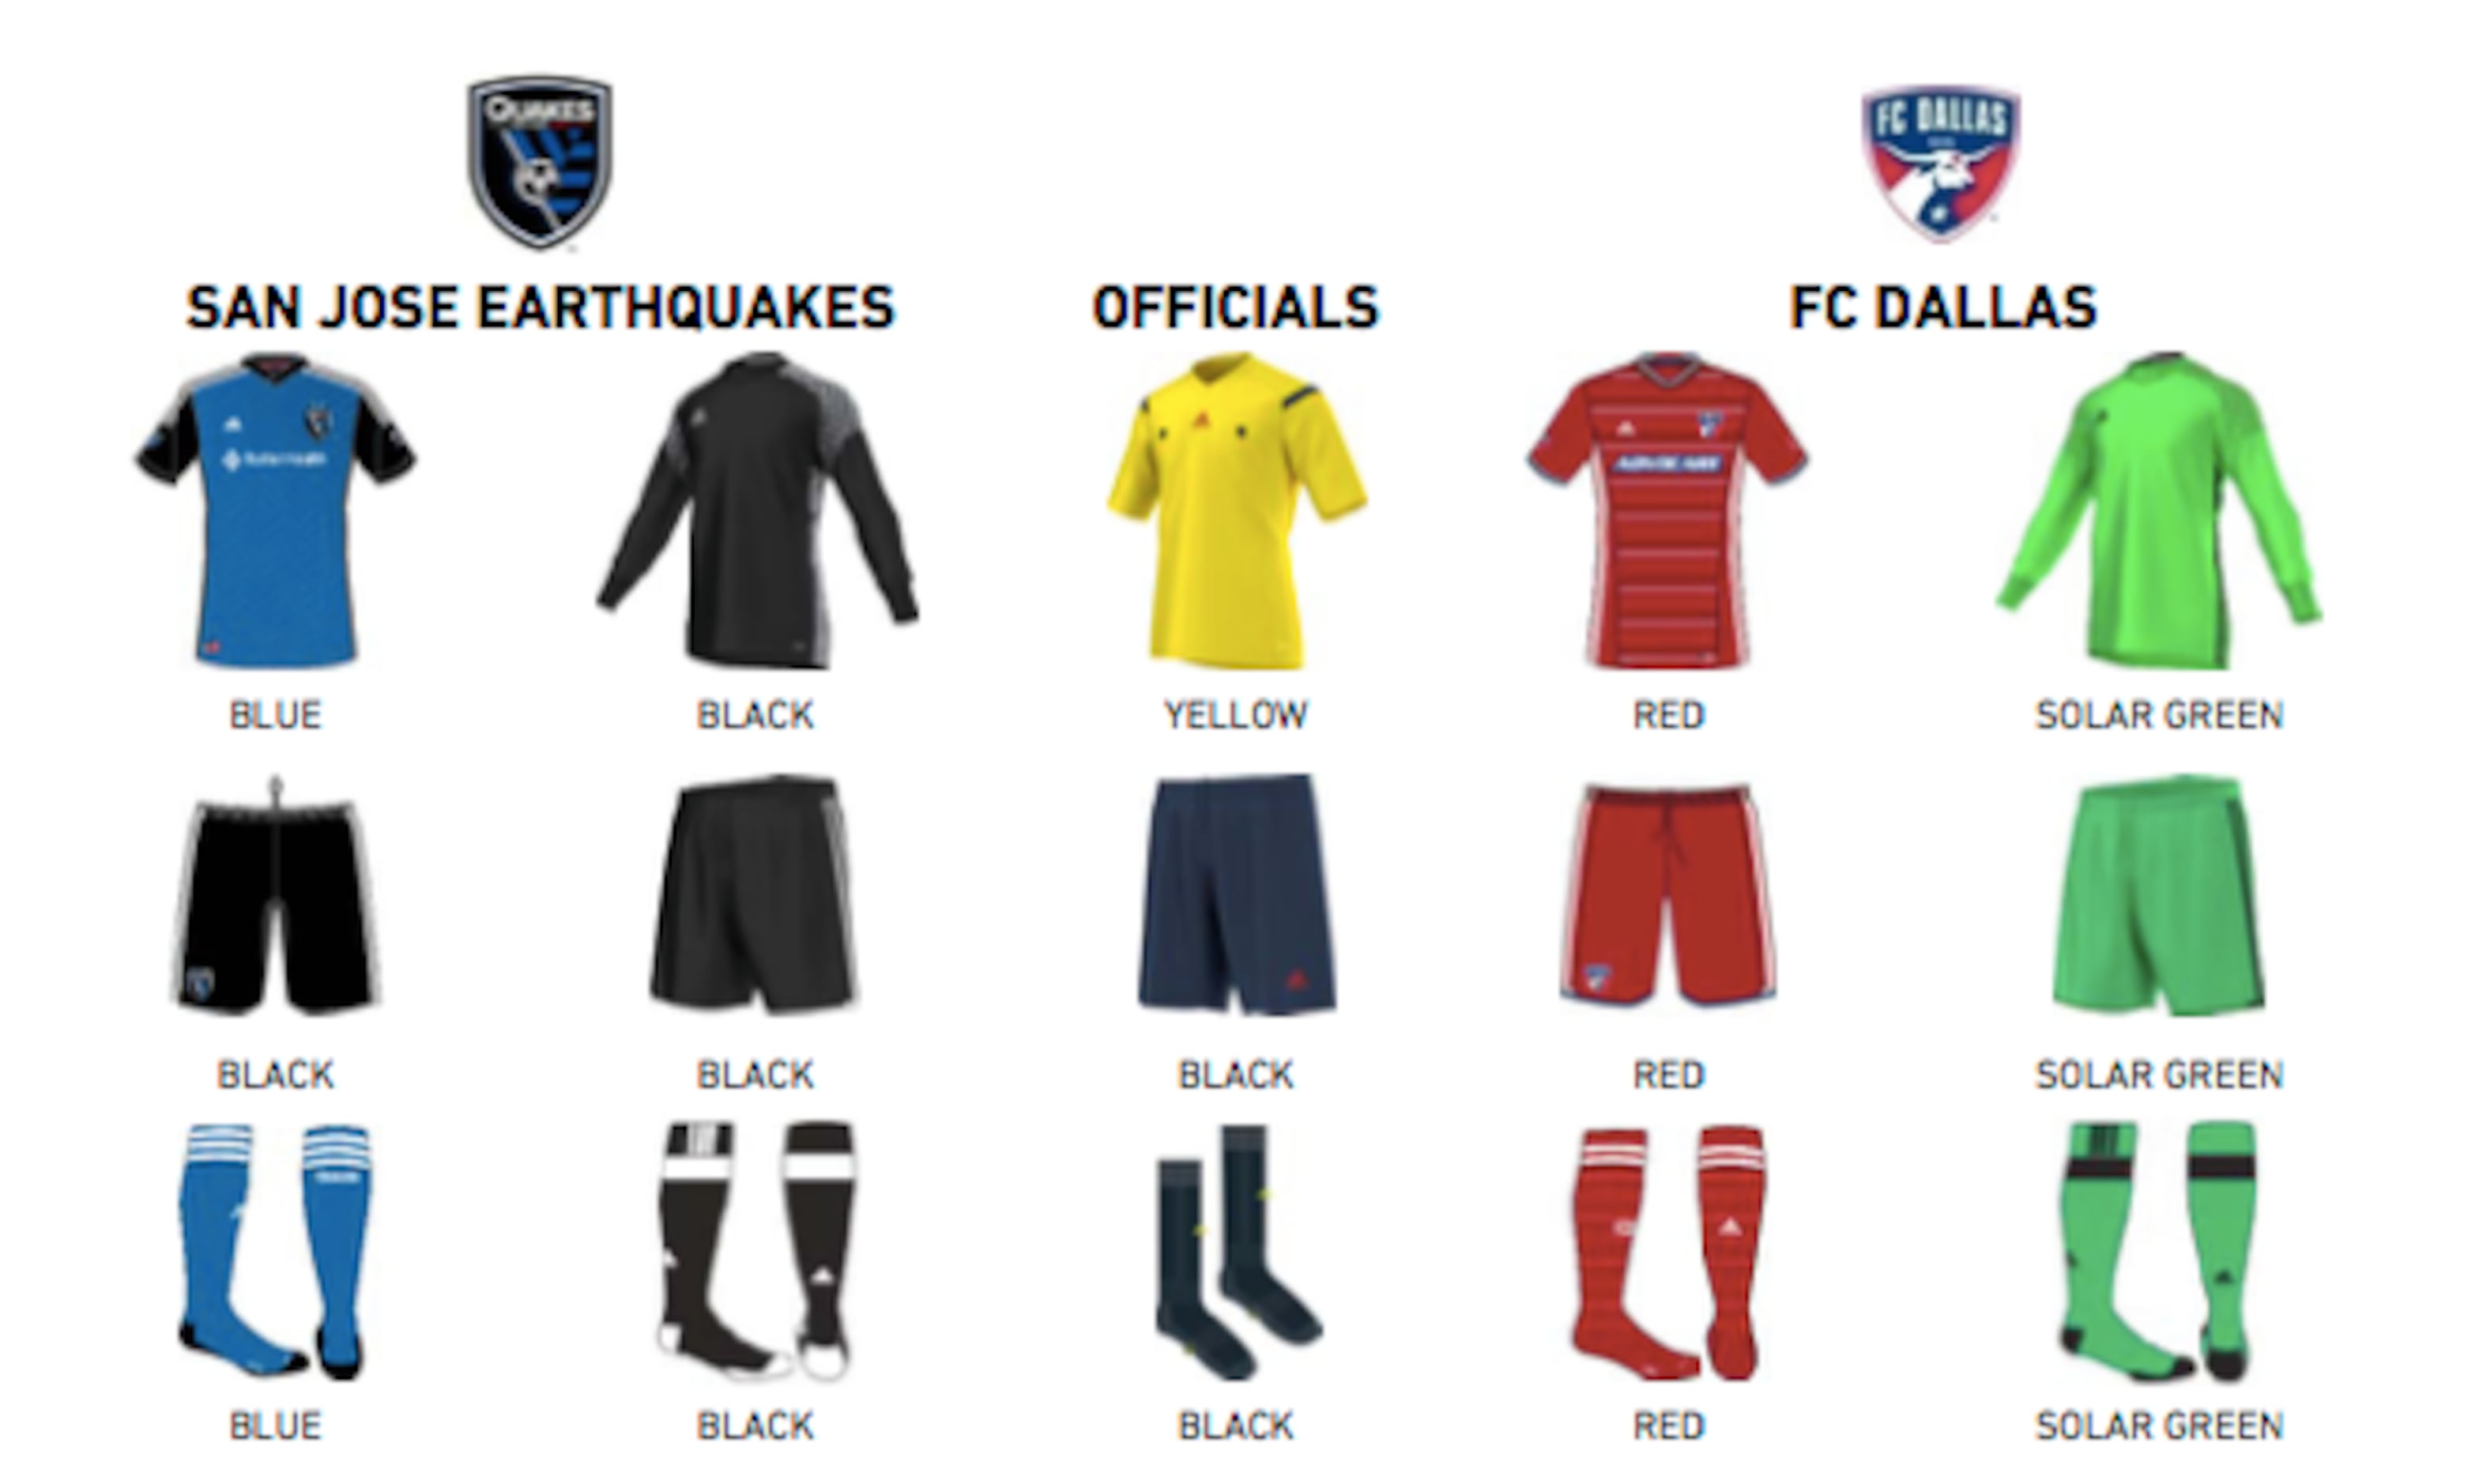 MLS: Grading the 2020 kits - Eastern Conference